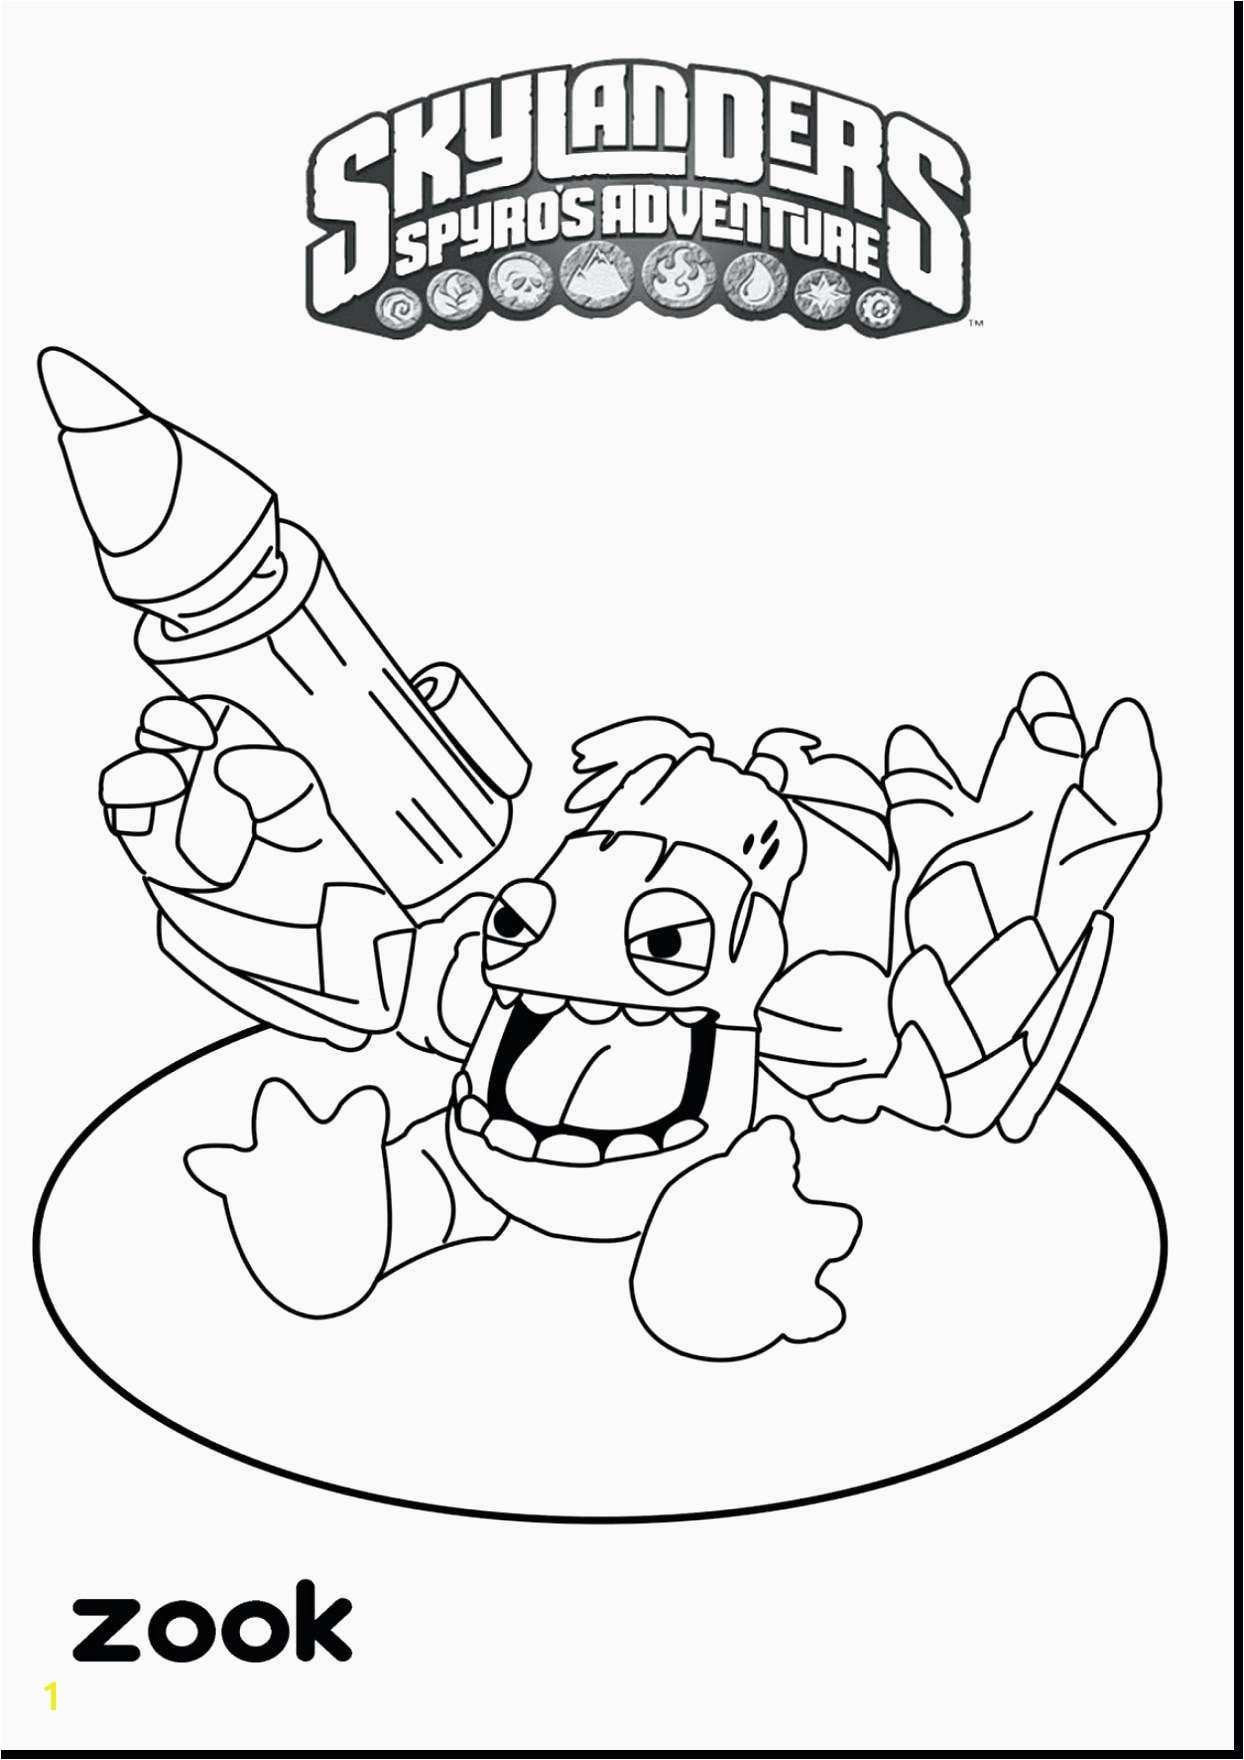 How To Print Coloring Pages Tractor Coloring Pages Jvzooreview